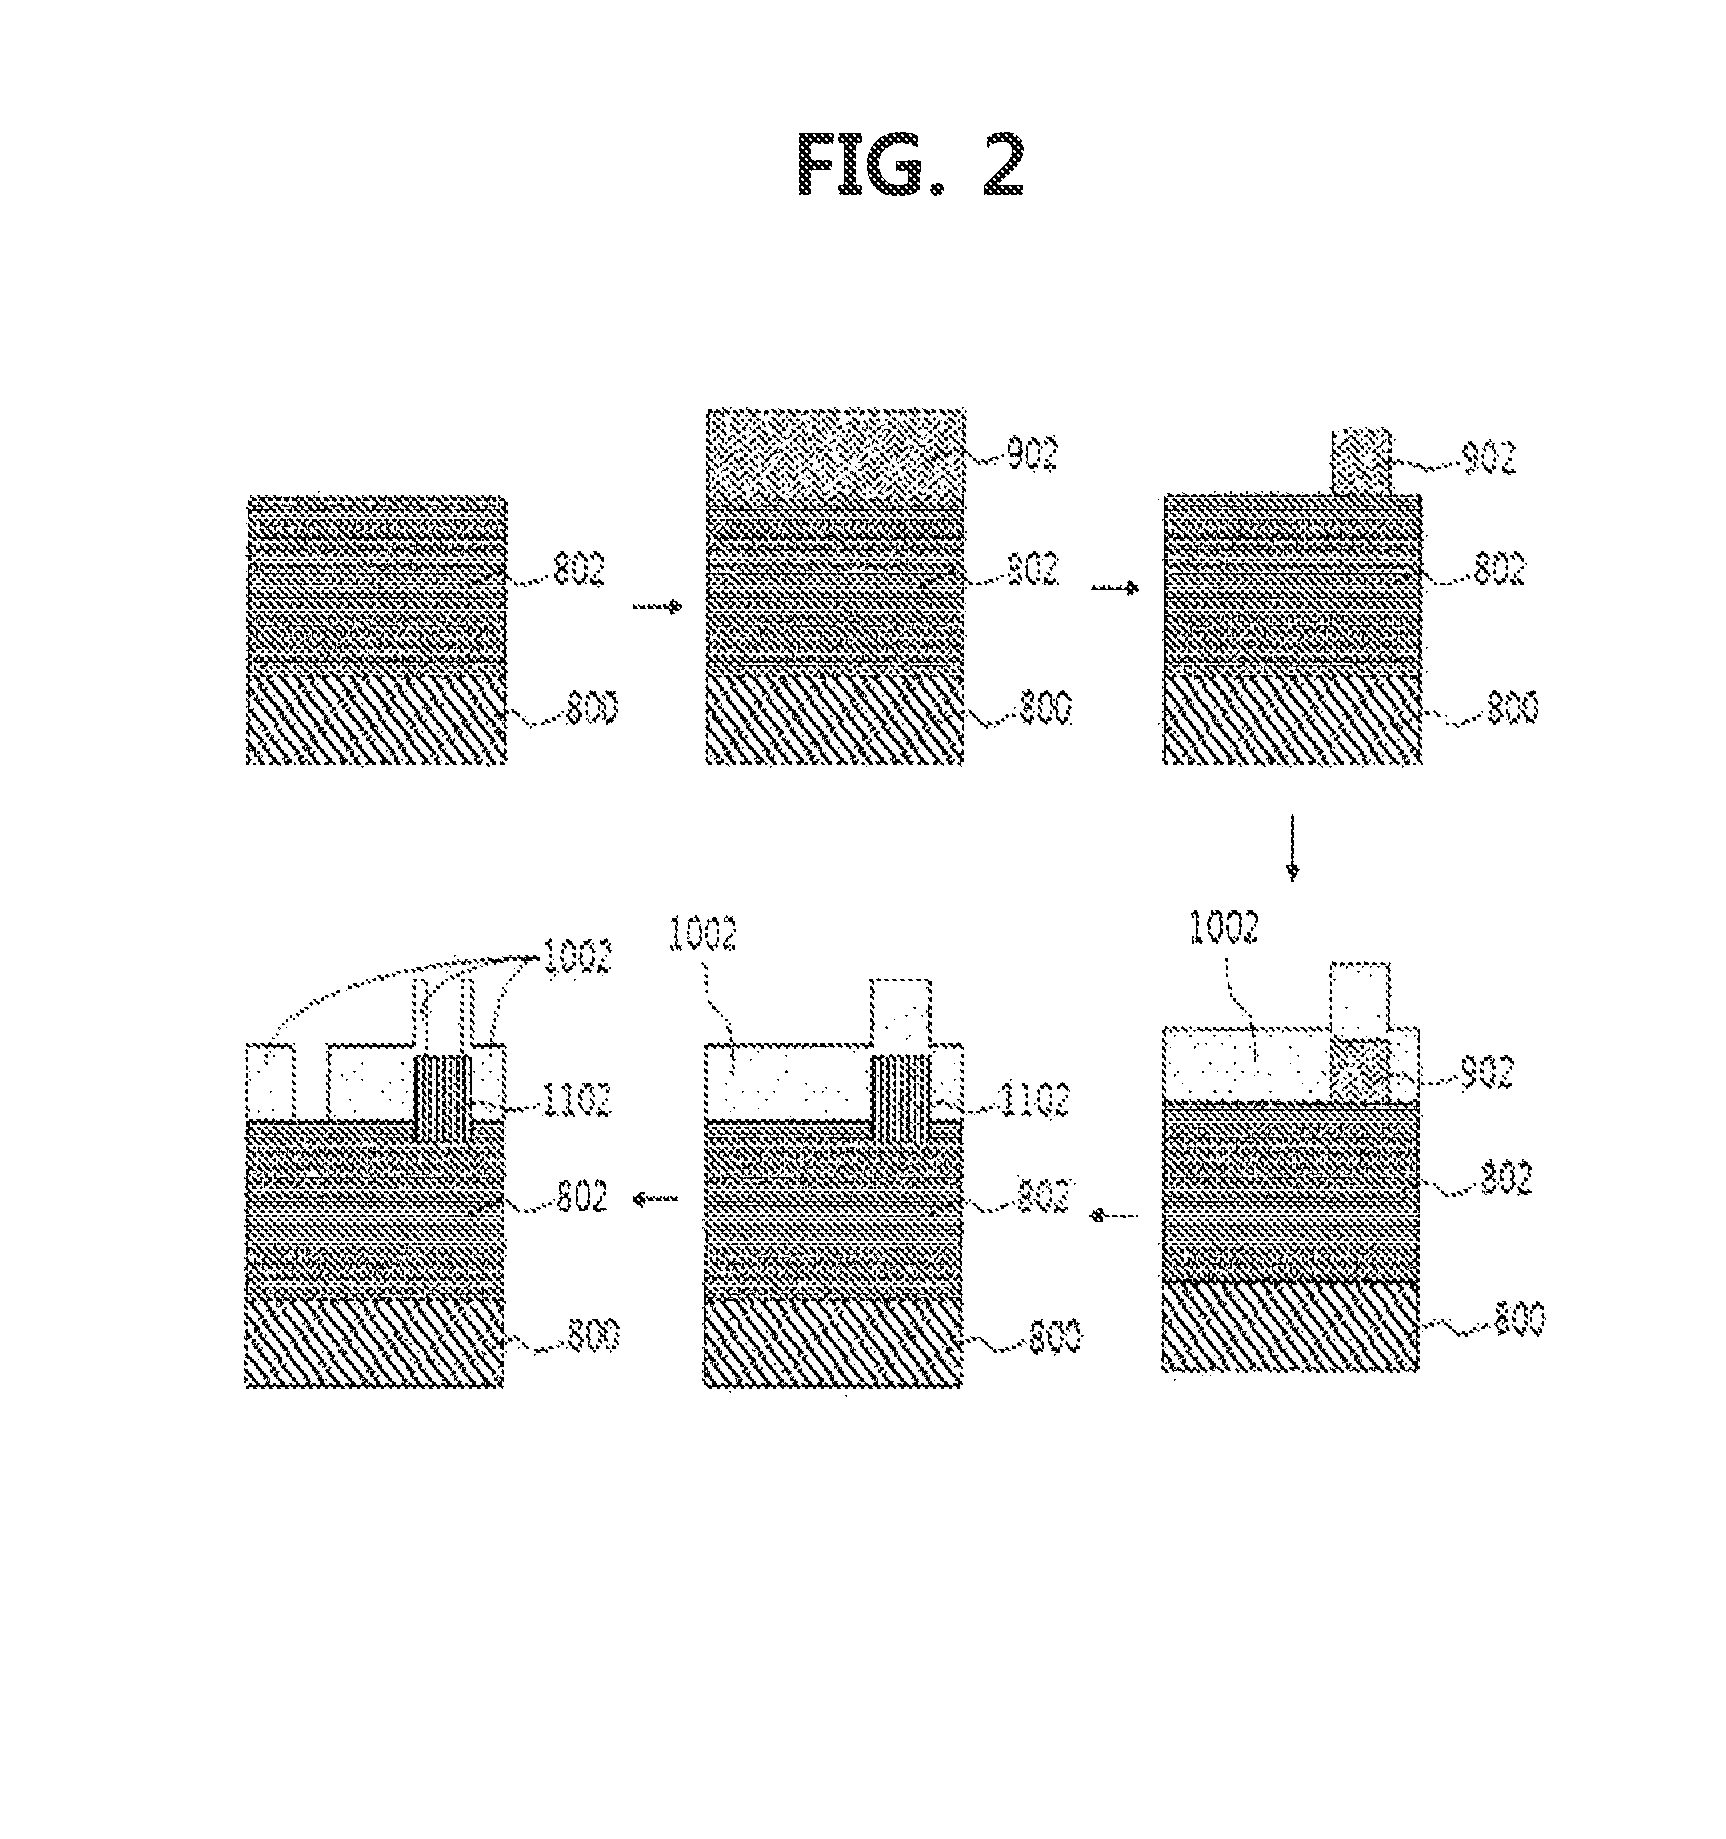 Method of healing defect at junction of semiconductor device using germanium